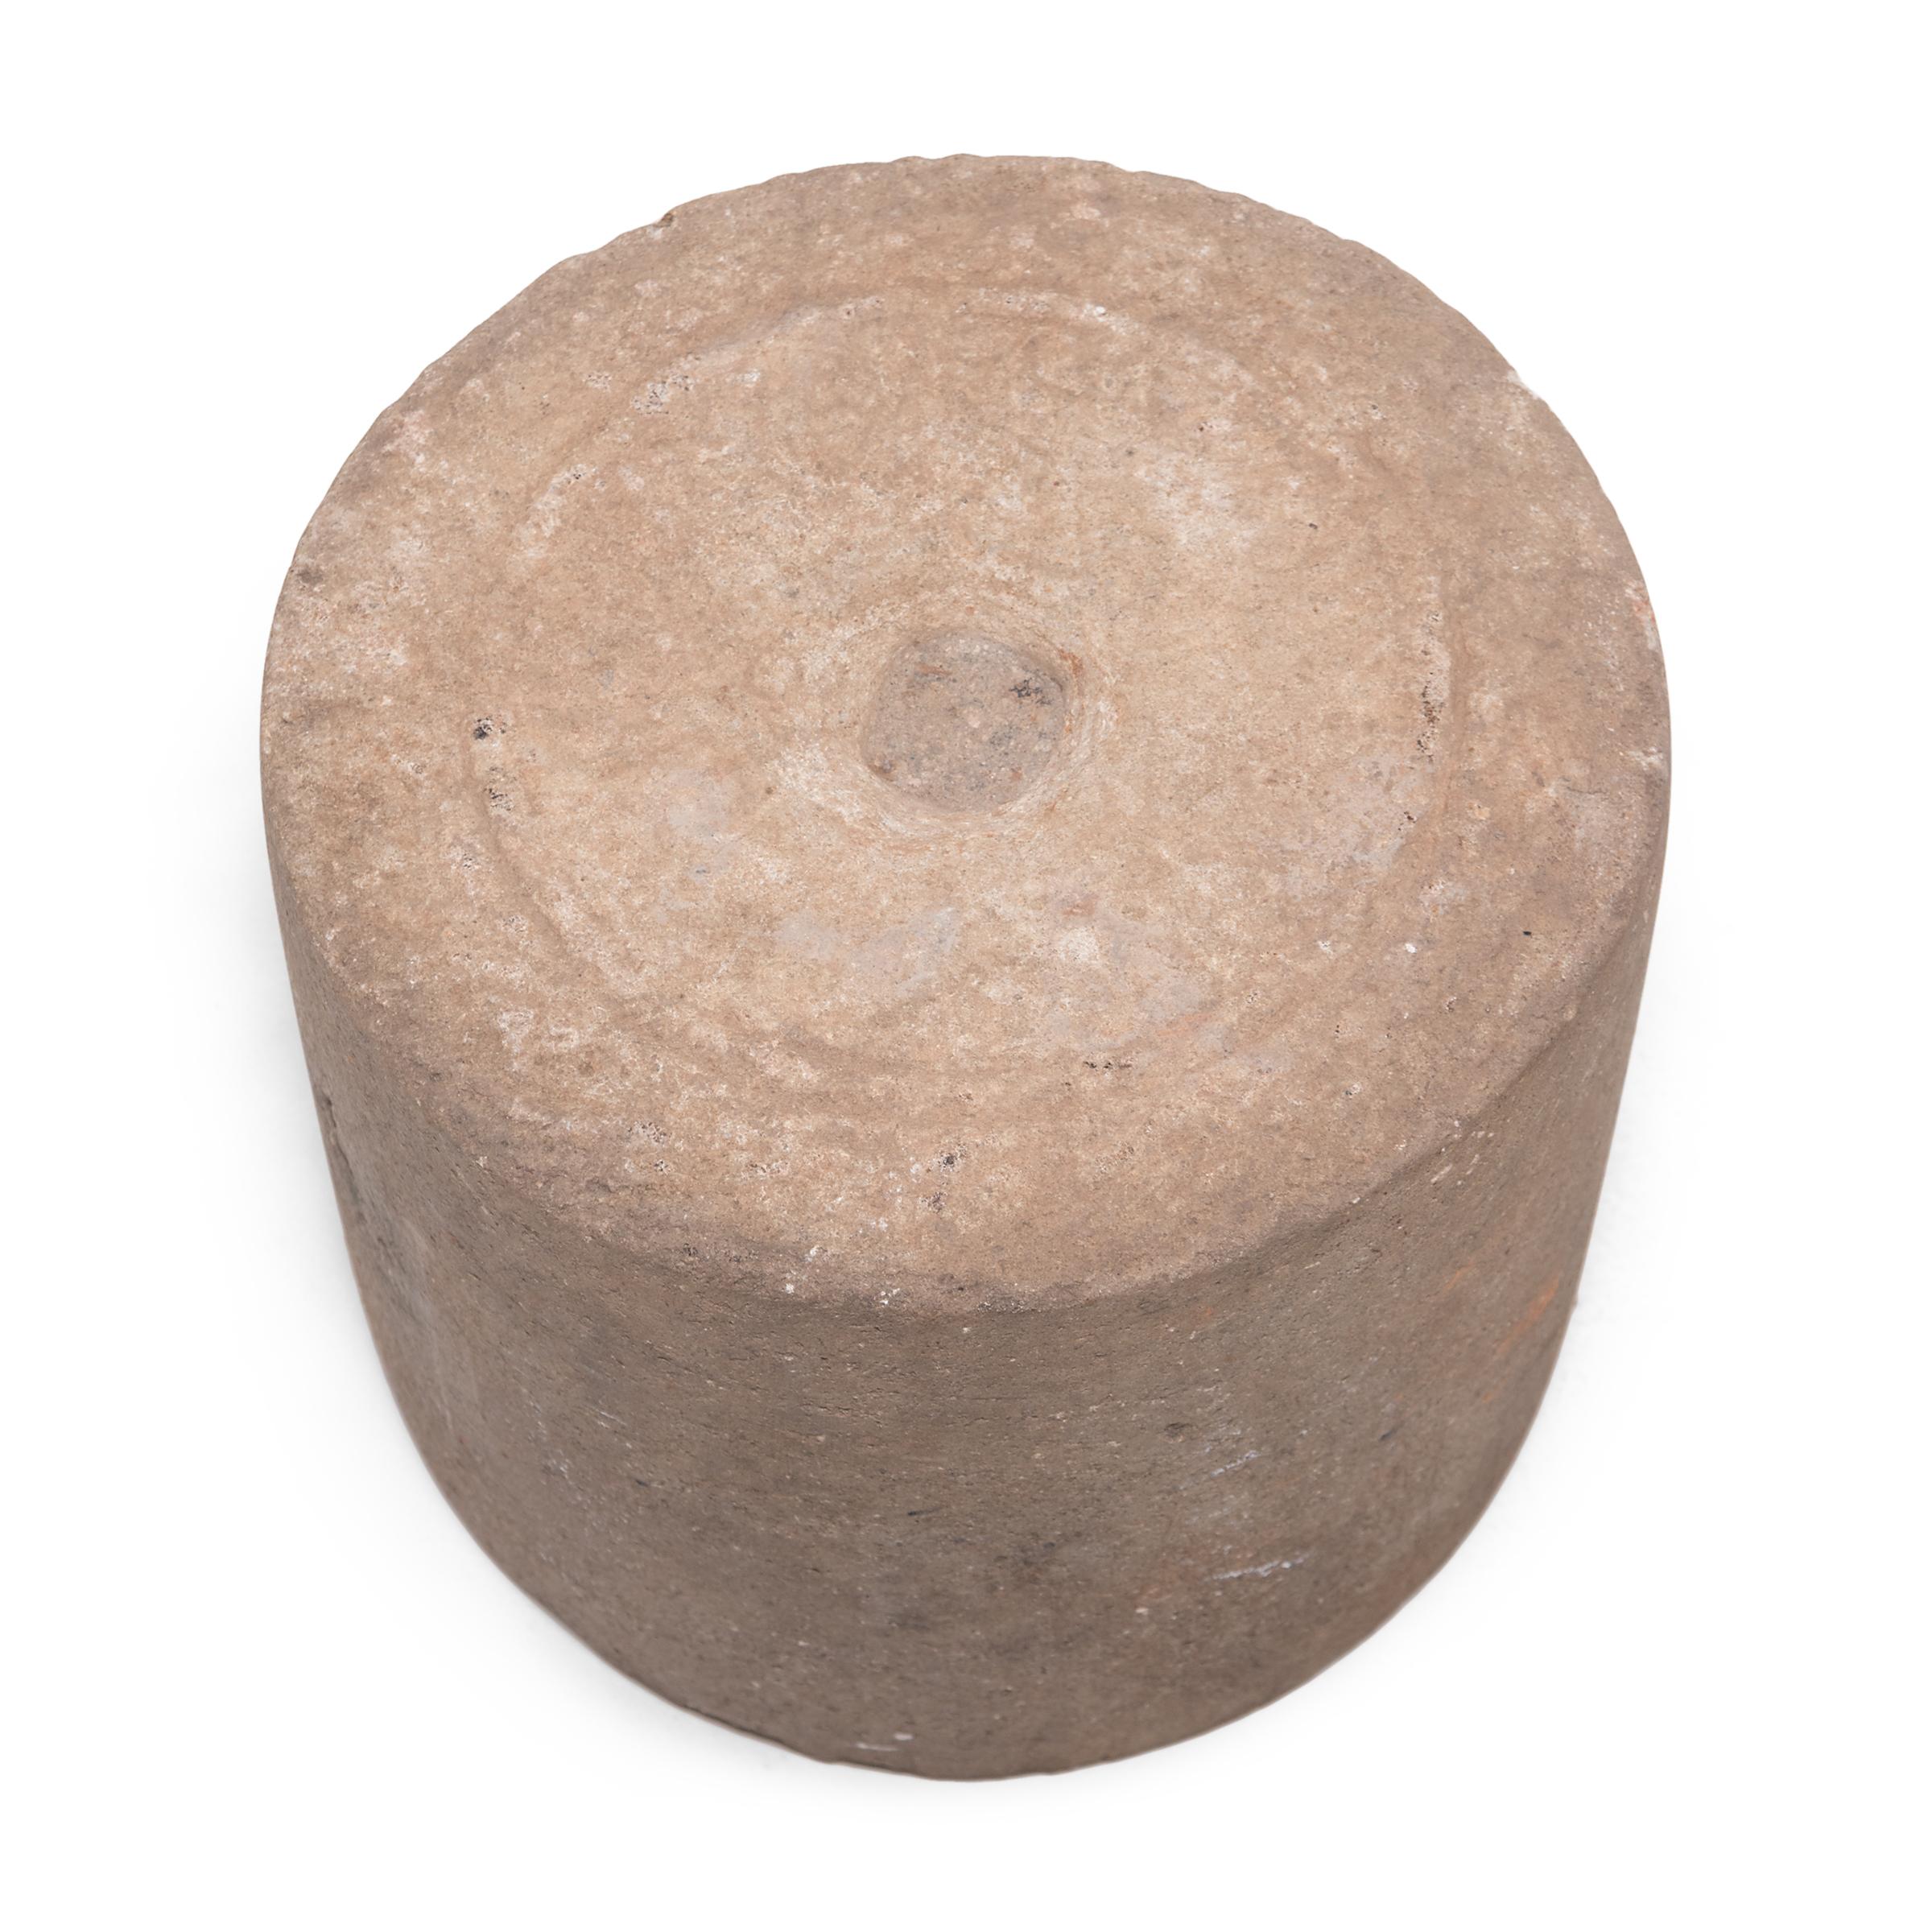 This stone barrel-shaped table is an architectural fragment from the late Qing dynasty and was originally used to anchor a metal flagpole. Despite its functional origins, the anchor has a balanced, linear form and continues a long Chinese tradition